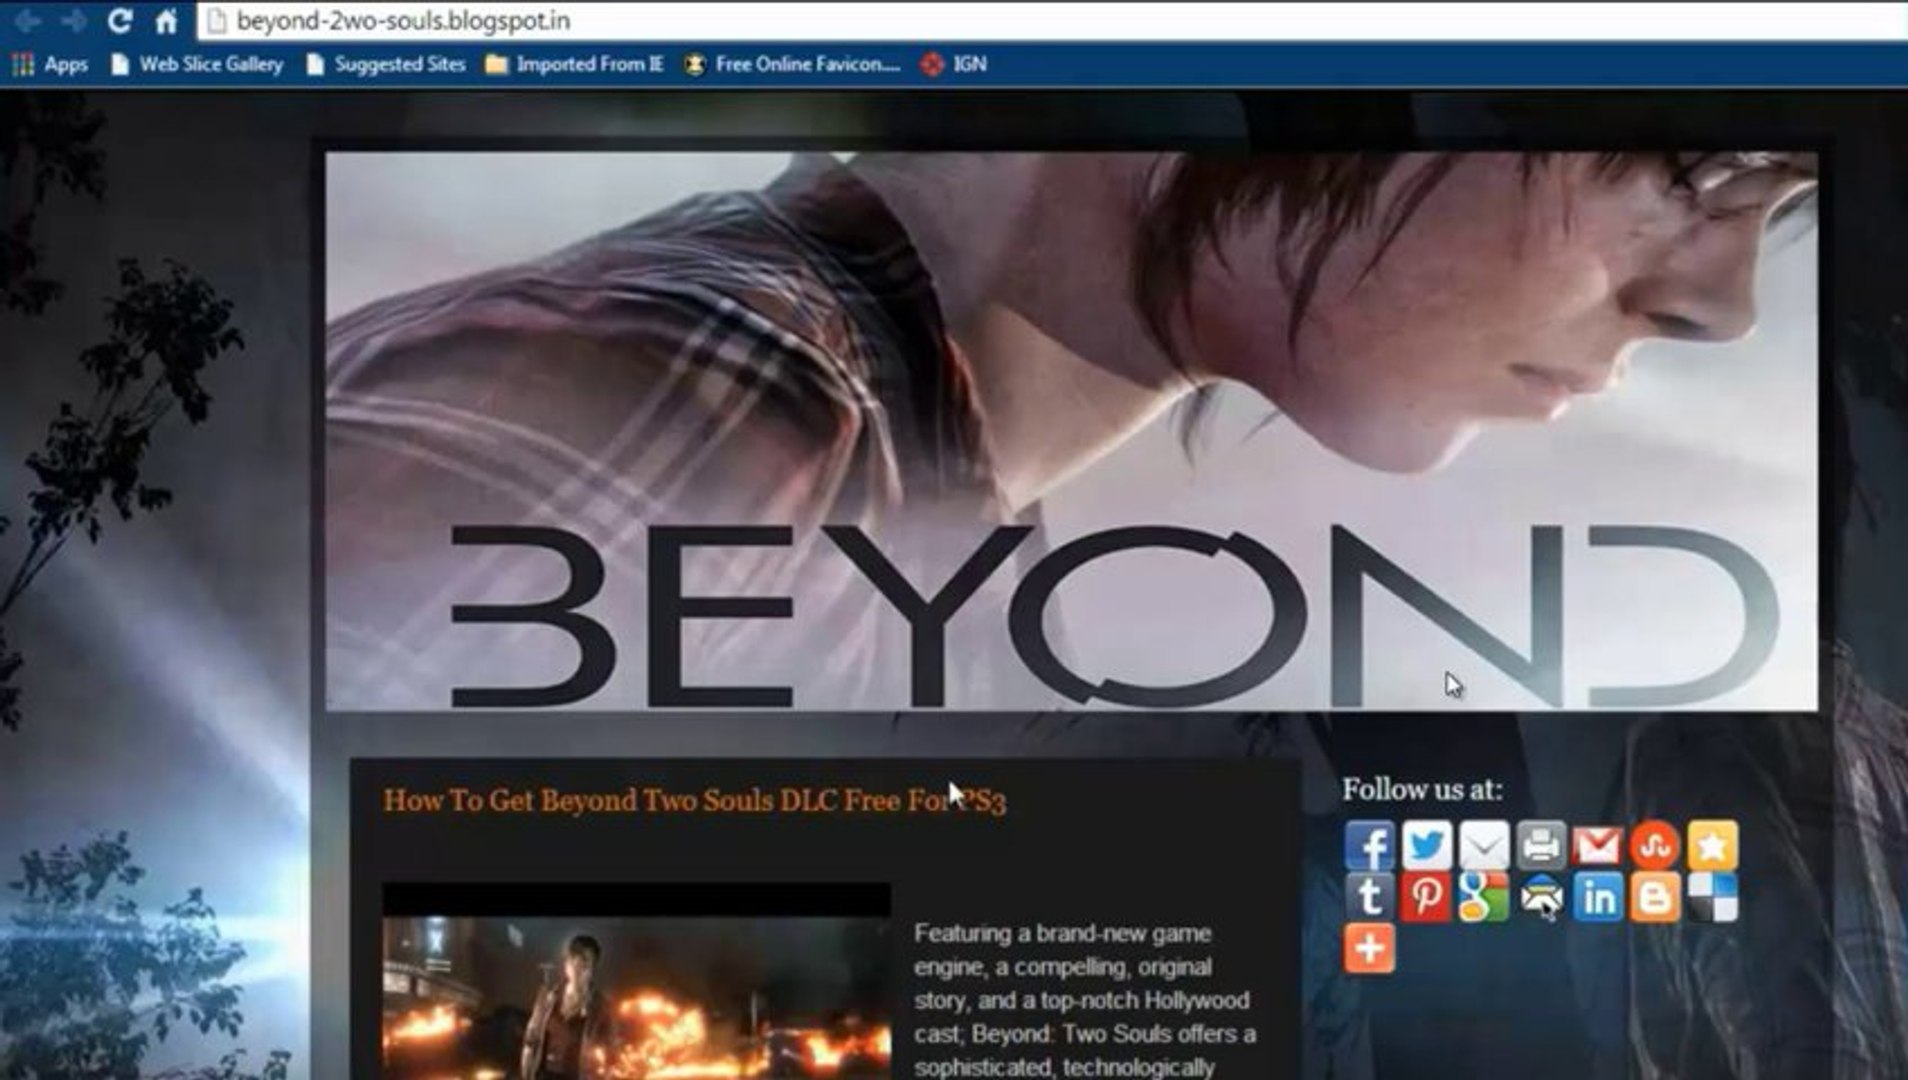 How to Install Beyond-two-souls Game Free on Xbox 360 PS3 And PC - video  Dailymotion